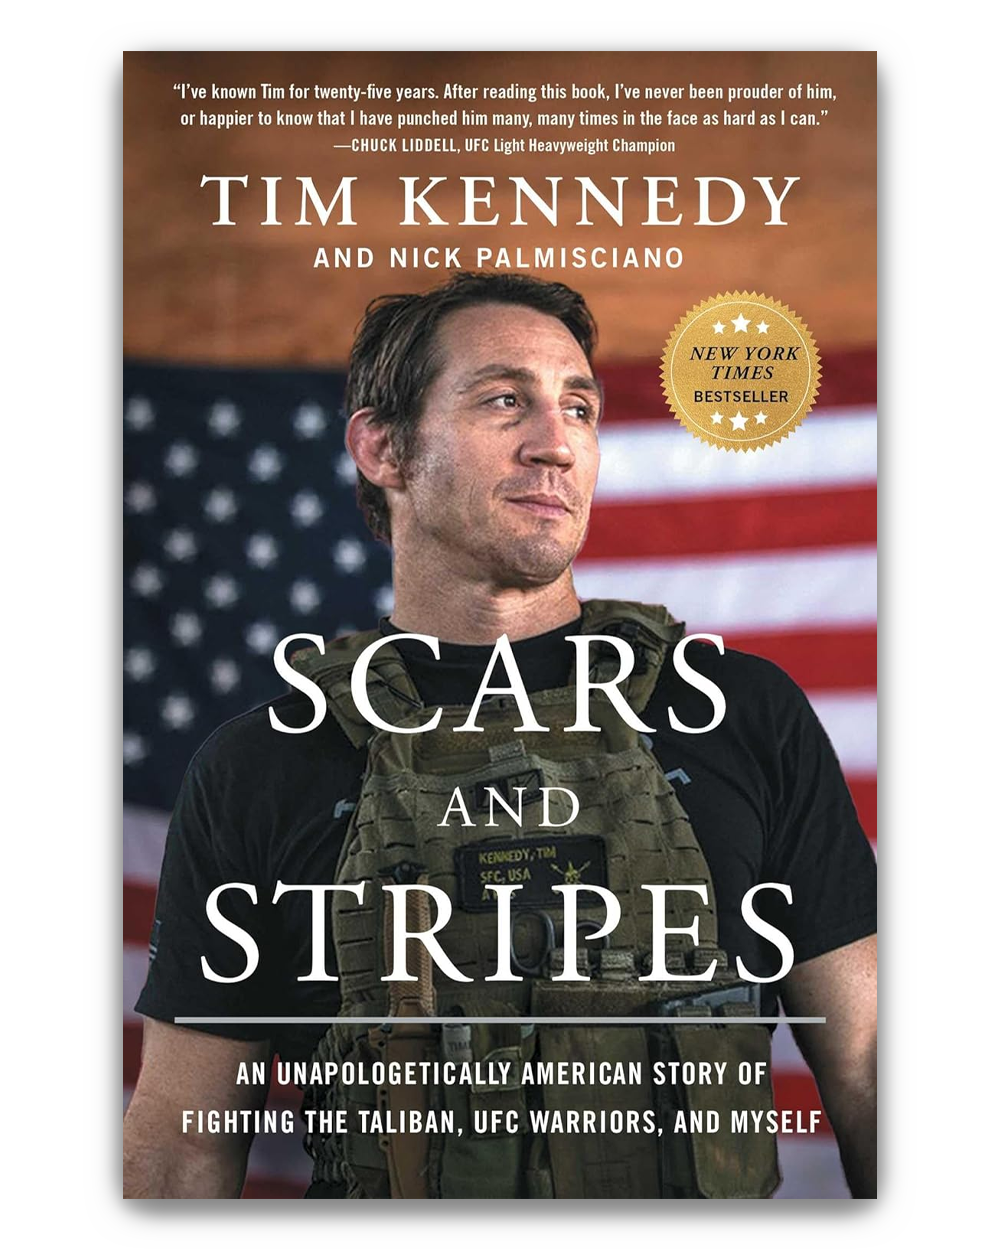 [Autographed] Paperback - Scars and Stripes: An Unapologetically American Story of Fighting the Taliban, UFC Warriors, and Myself